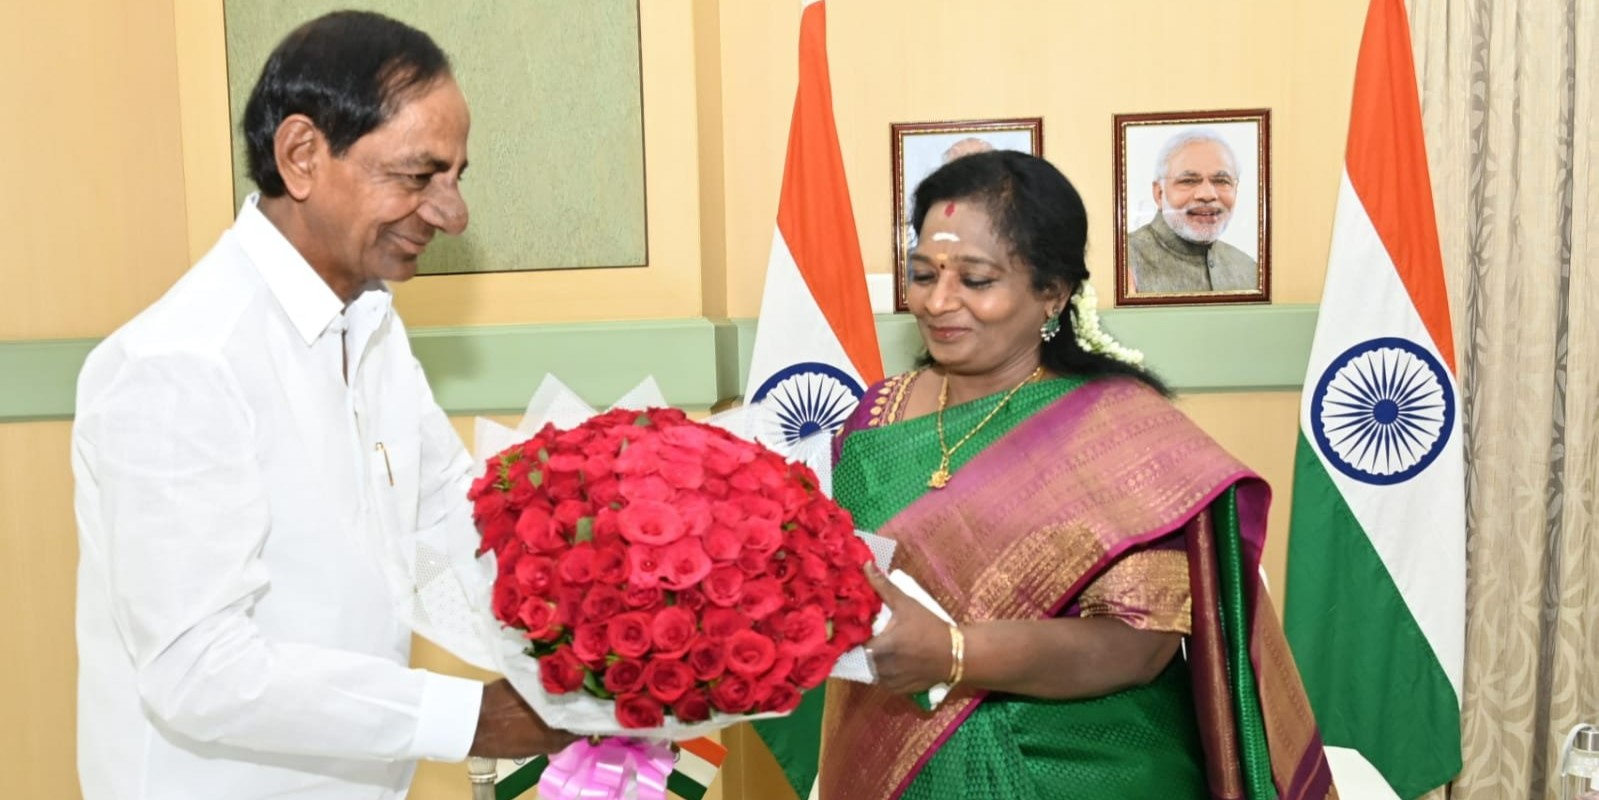 A file picture of Telangana Chief Minister K Chandrashekar Rao greets Governor Tamilisai Soundararajan at the oath-taking ceremony of Justice Sri Ujjal Bhuyan as Chief Justice of the High Court of Telangana (Official Facebook: KalvakuntlaChandrashekarRao)